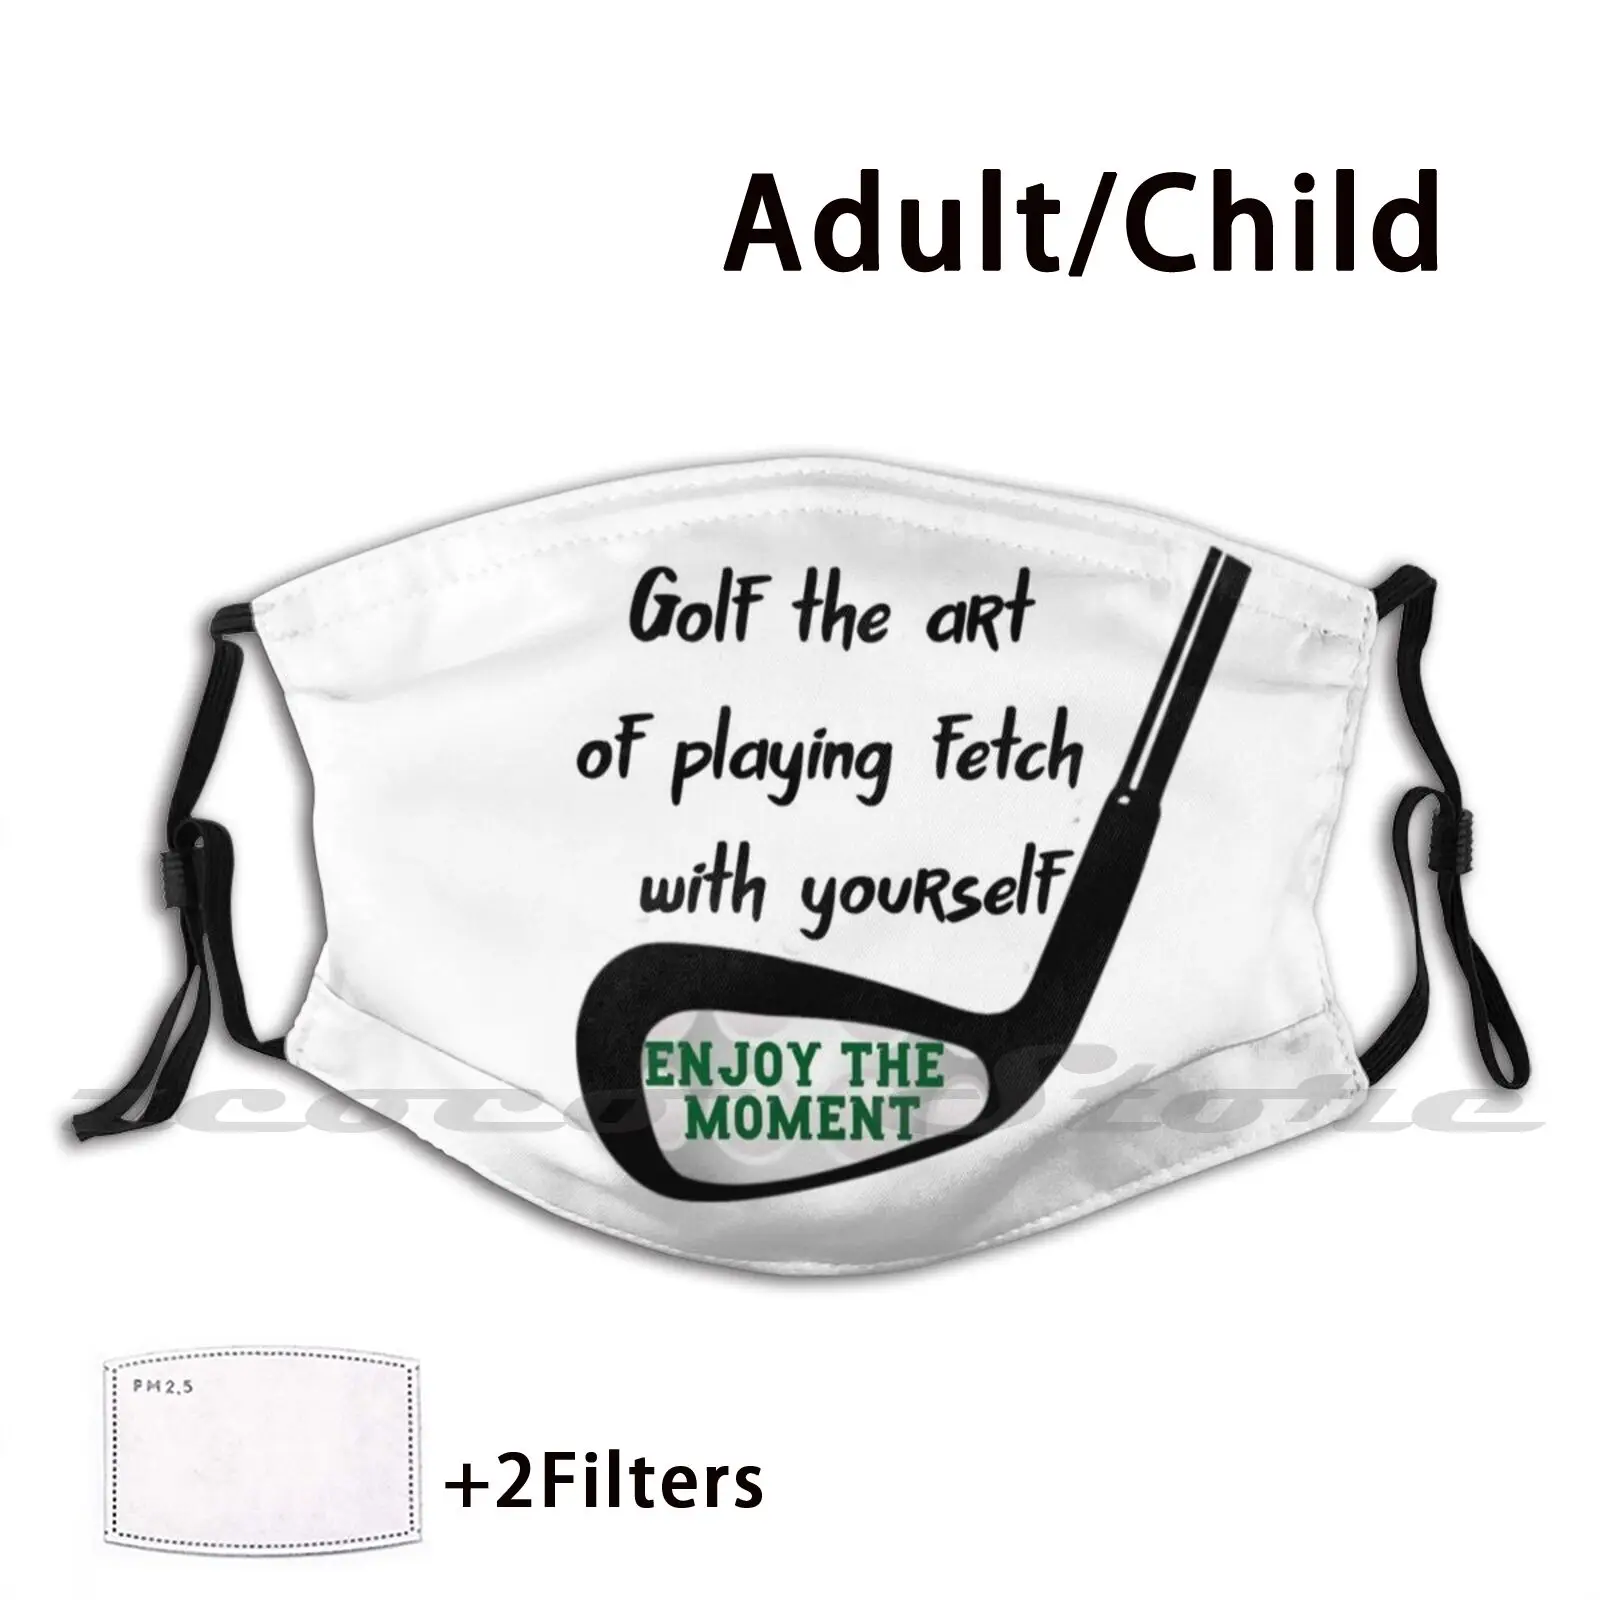 

Golf The Art Of Playing Fetch With Yourself Enjoy The Moment 20 Mask Cloth Washable Diy Filter Pm2.5 Adult Kids Golf Online